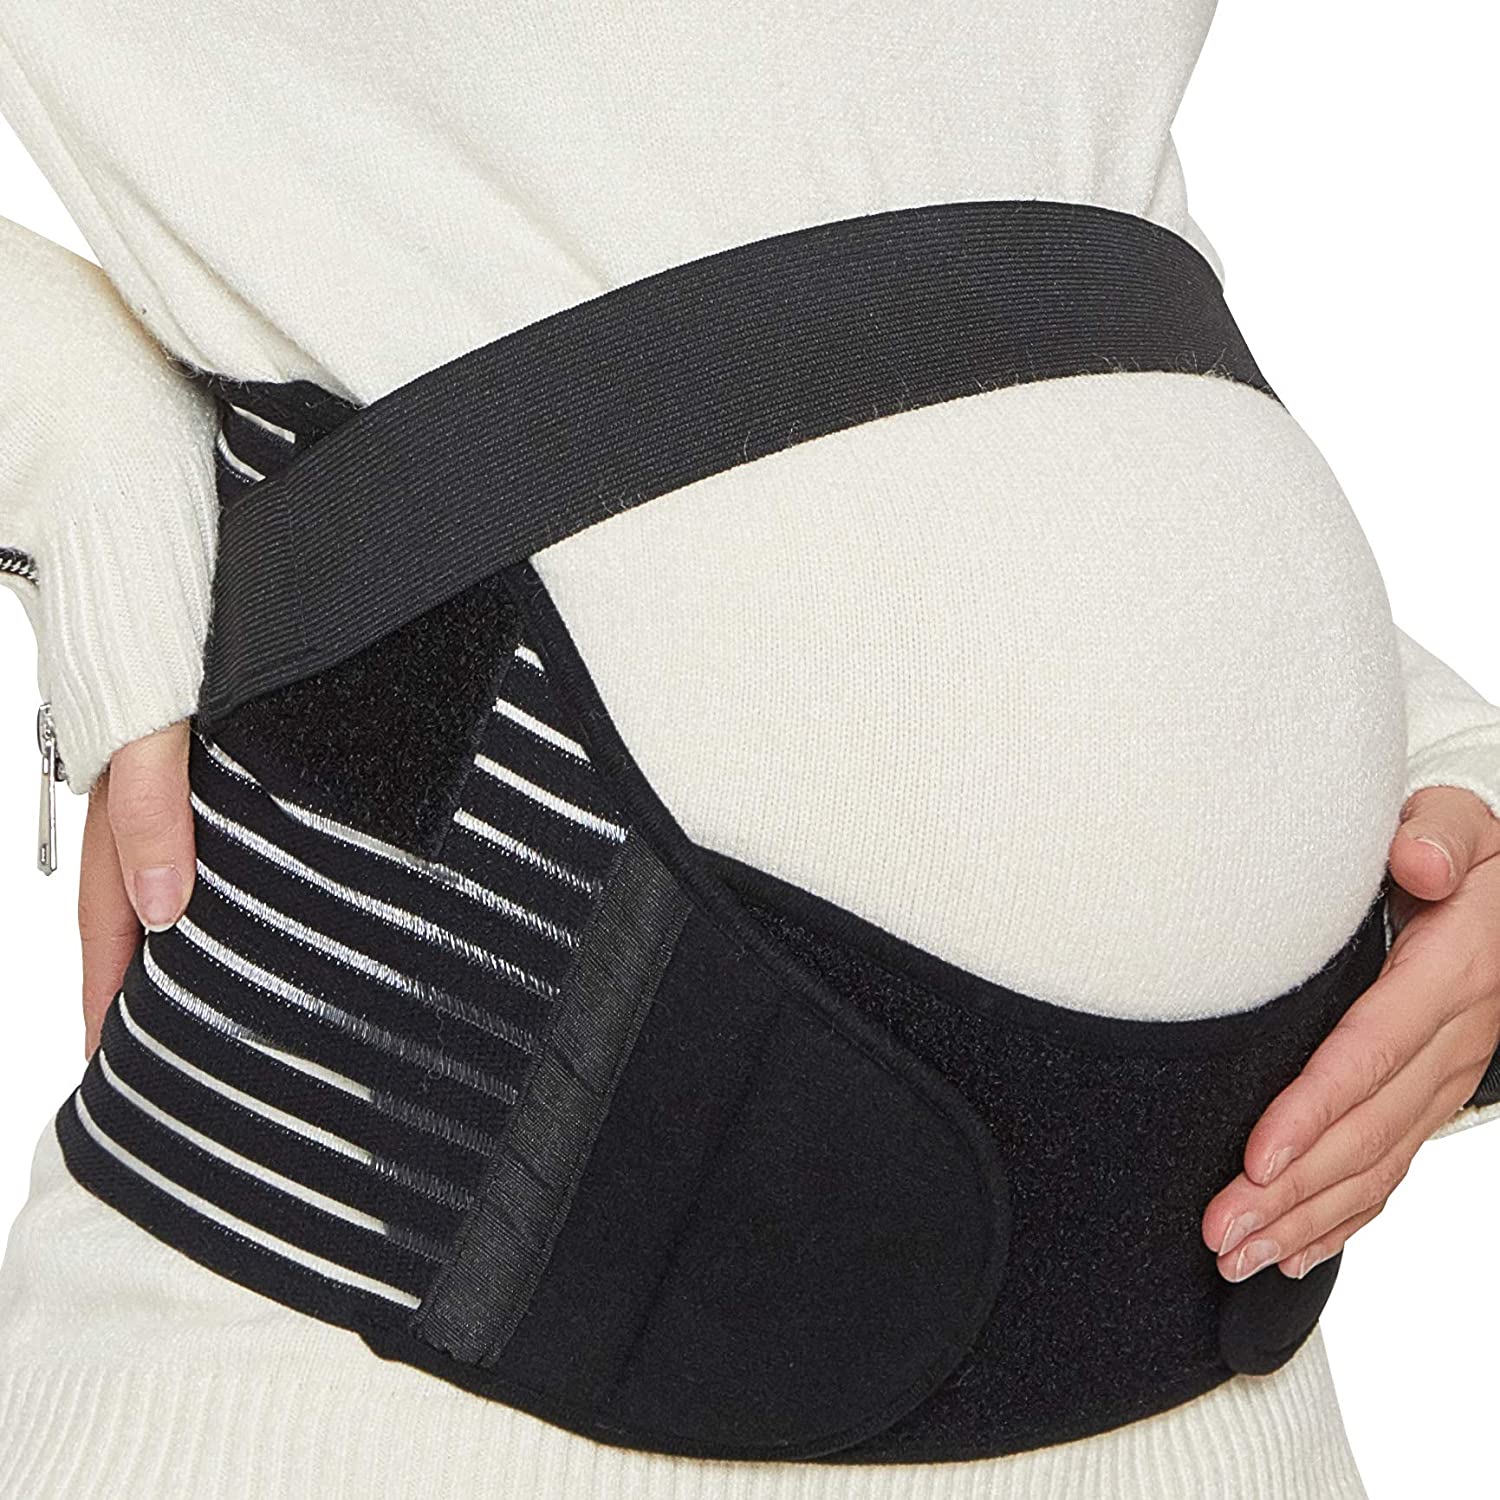 Review of NeoTech Care Pregnancy Support Maternity Belt, Waist/Back/Abdomen Band